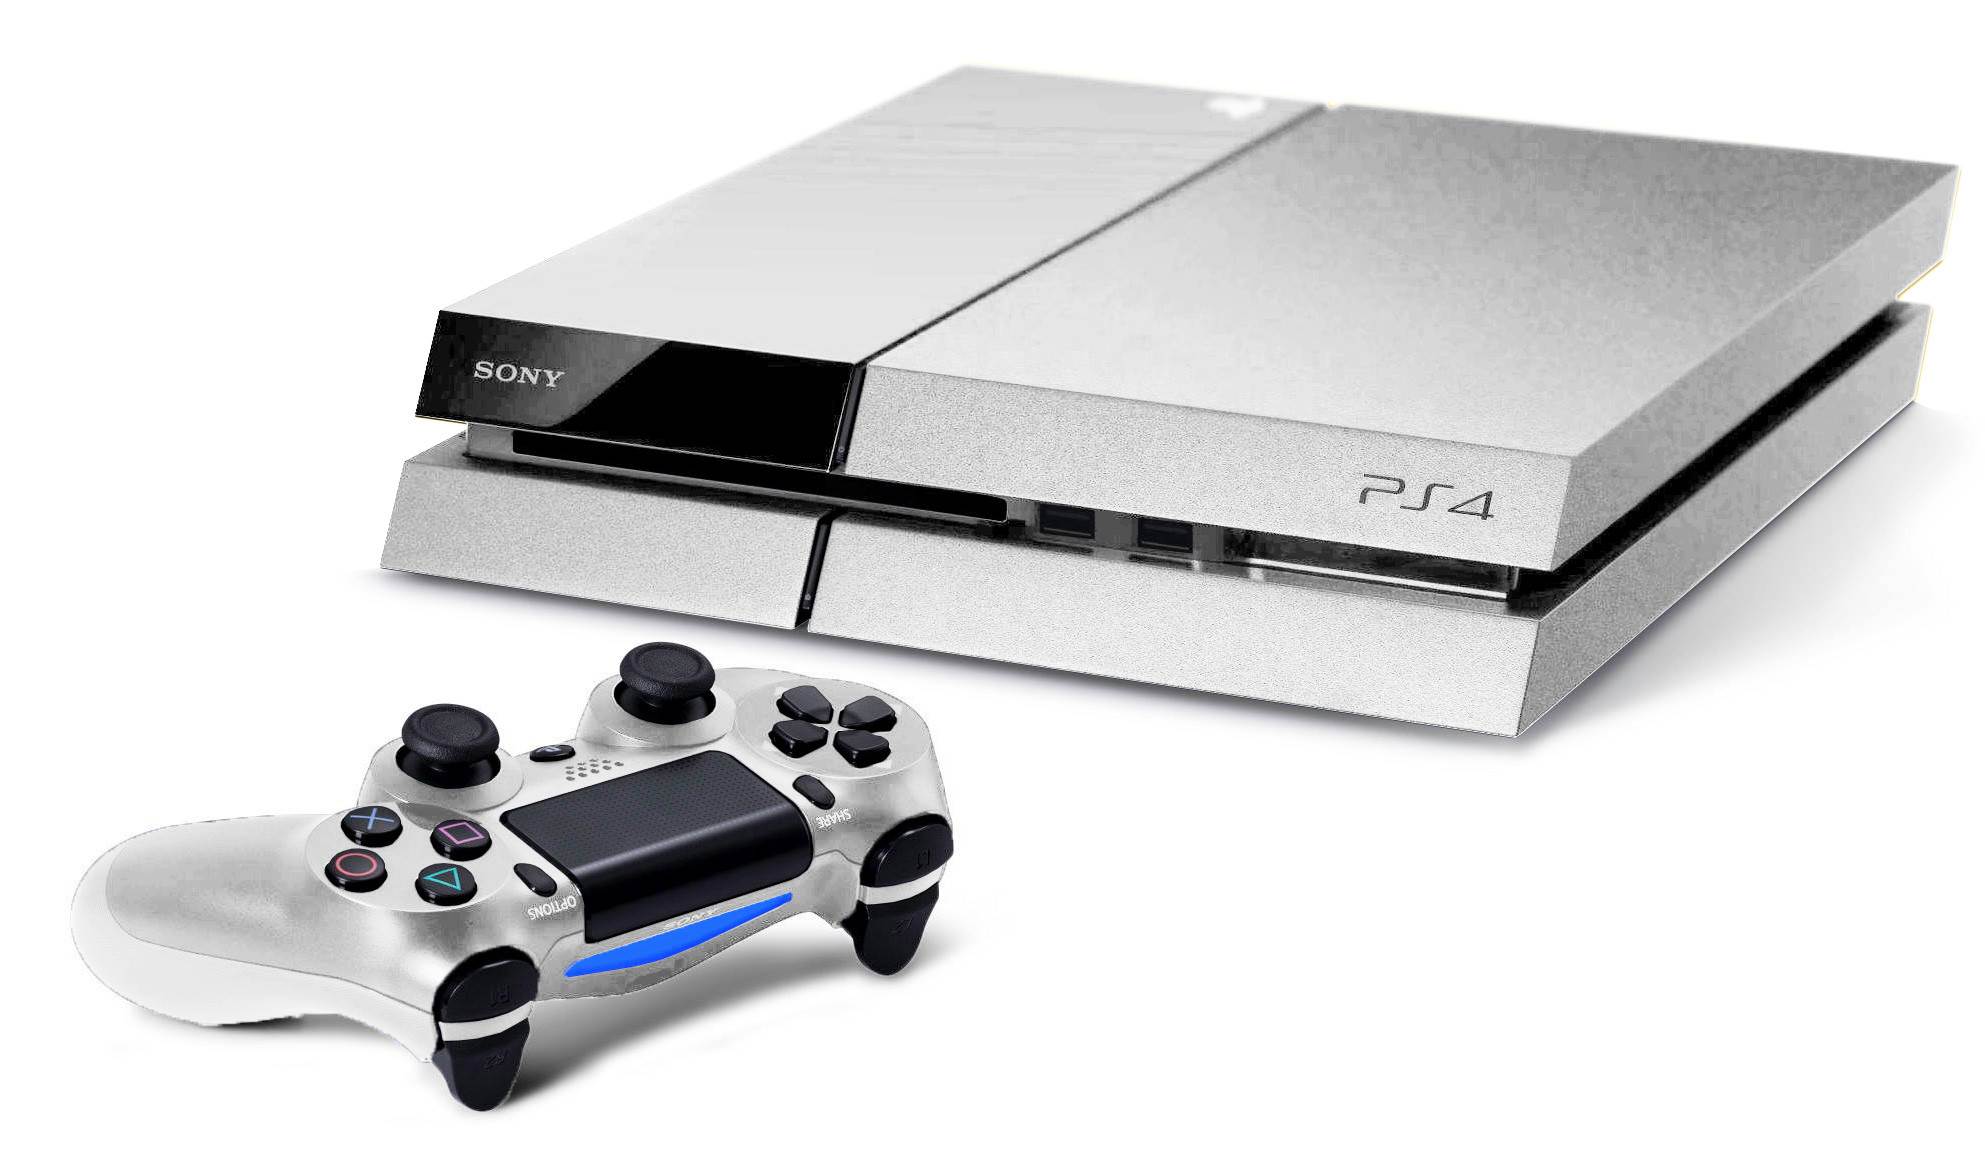 Can we all agree the PS4 is the sexiest videogame console of all time